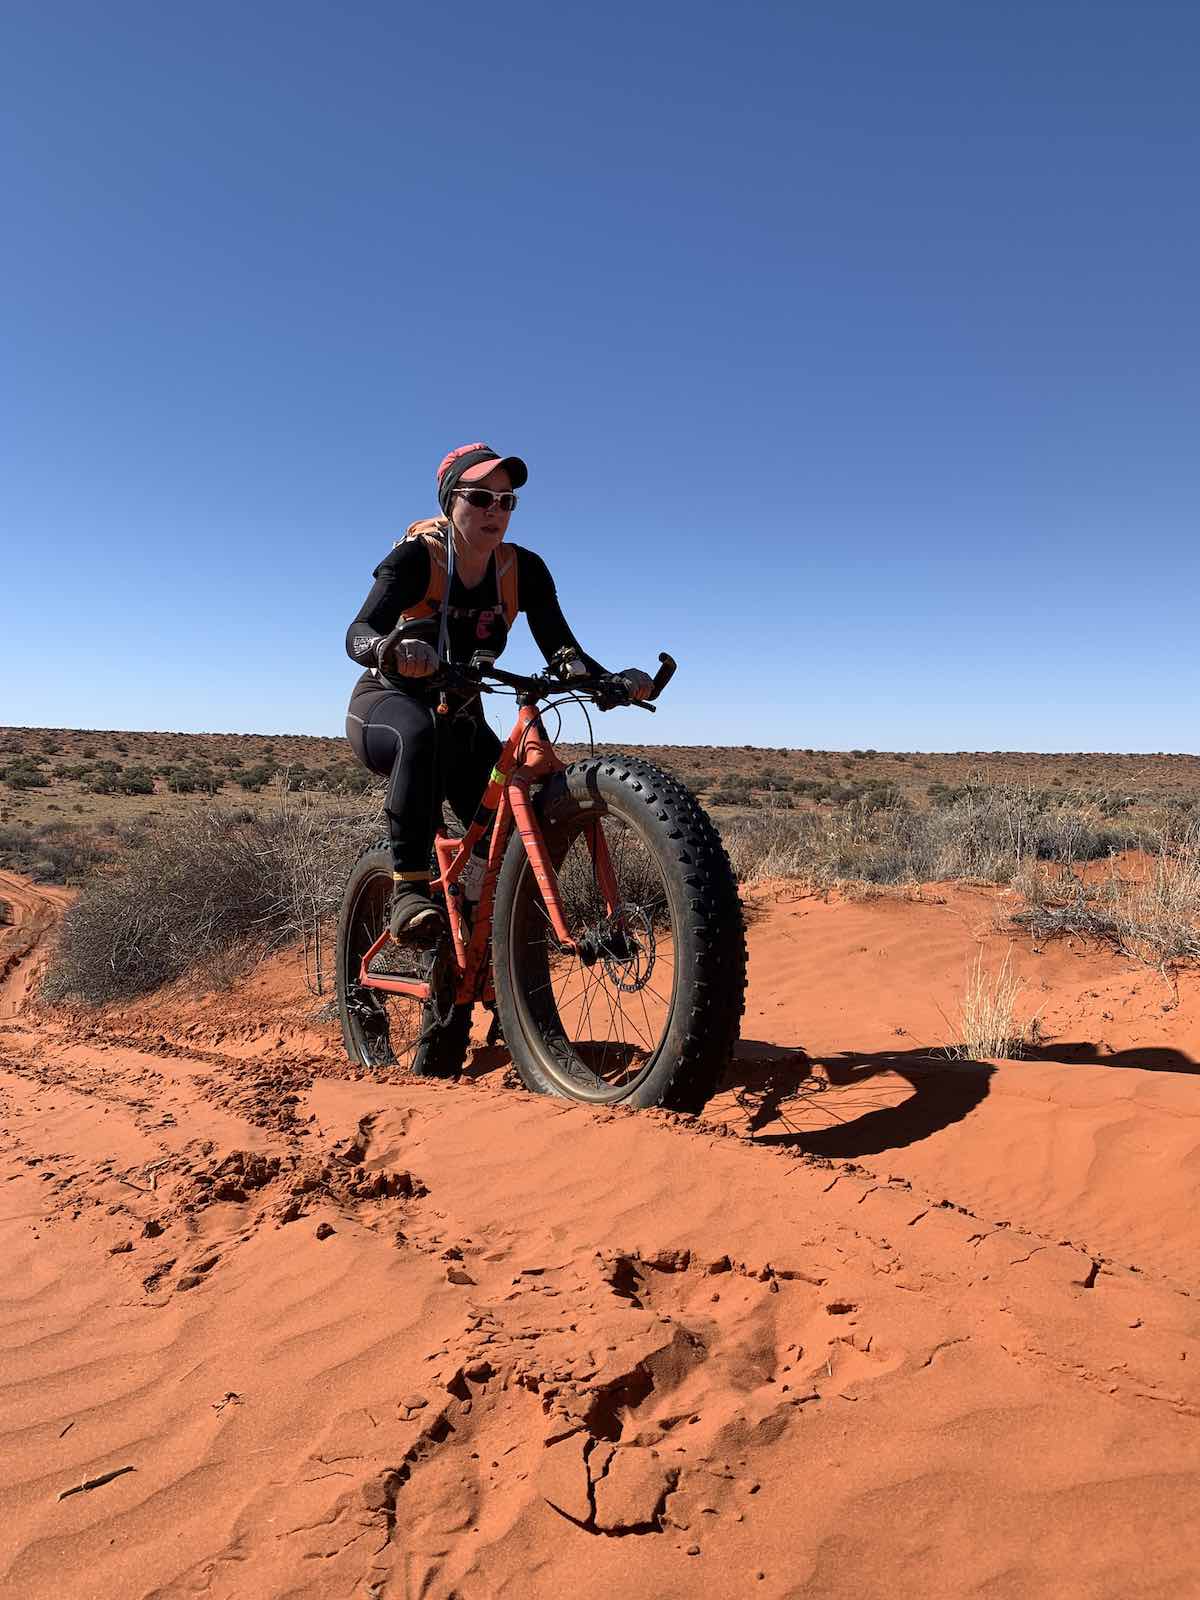 bikerumor pic of the day a cyclist rides a fat tire bicycle on red desert sand, the sky is clear and dark blue, there is brush growing in the flat distance.